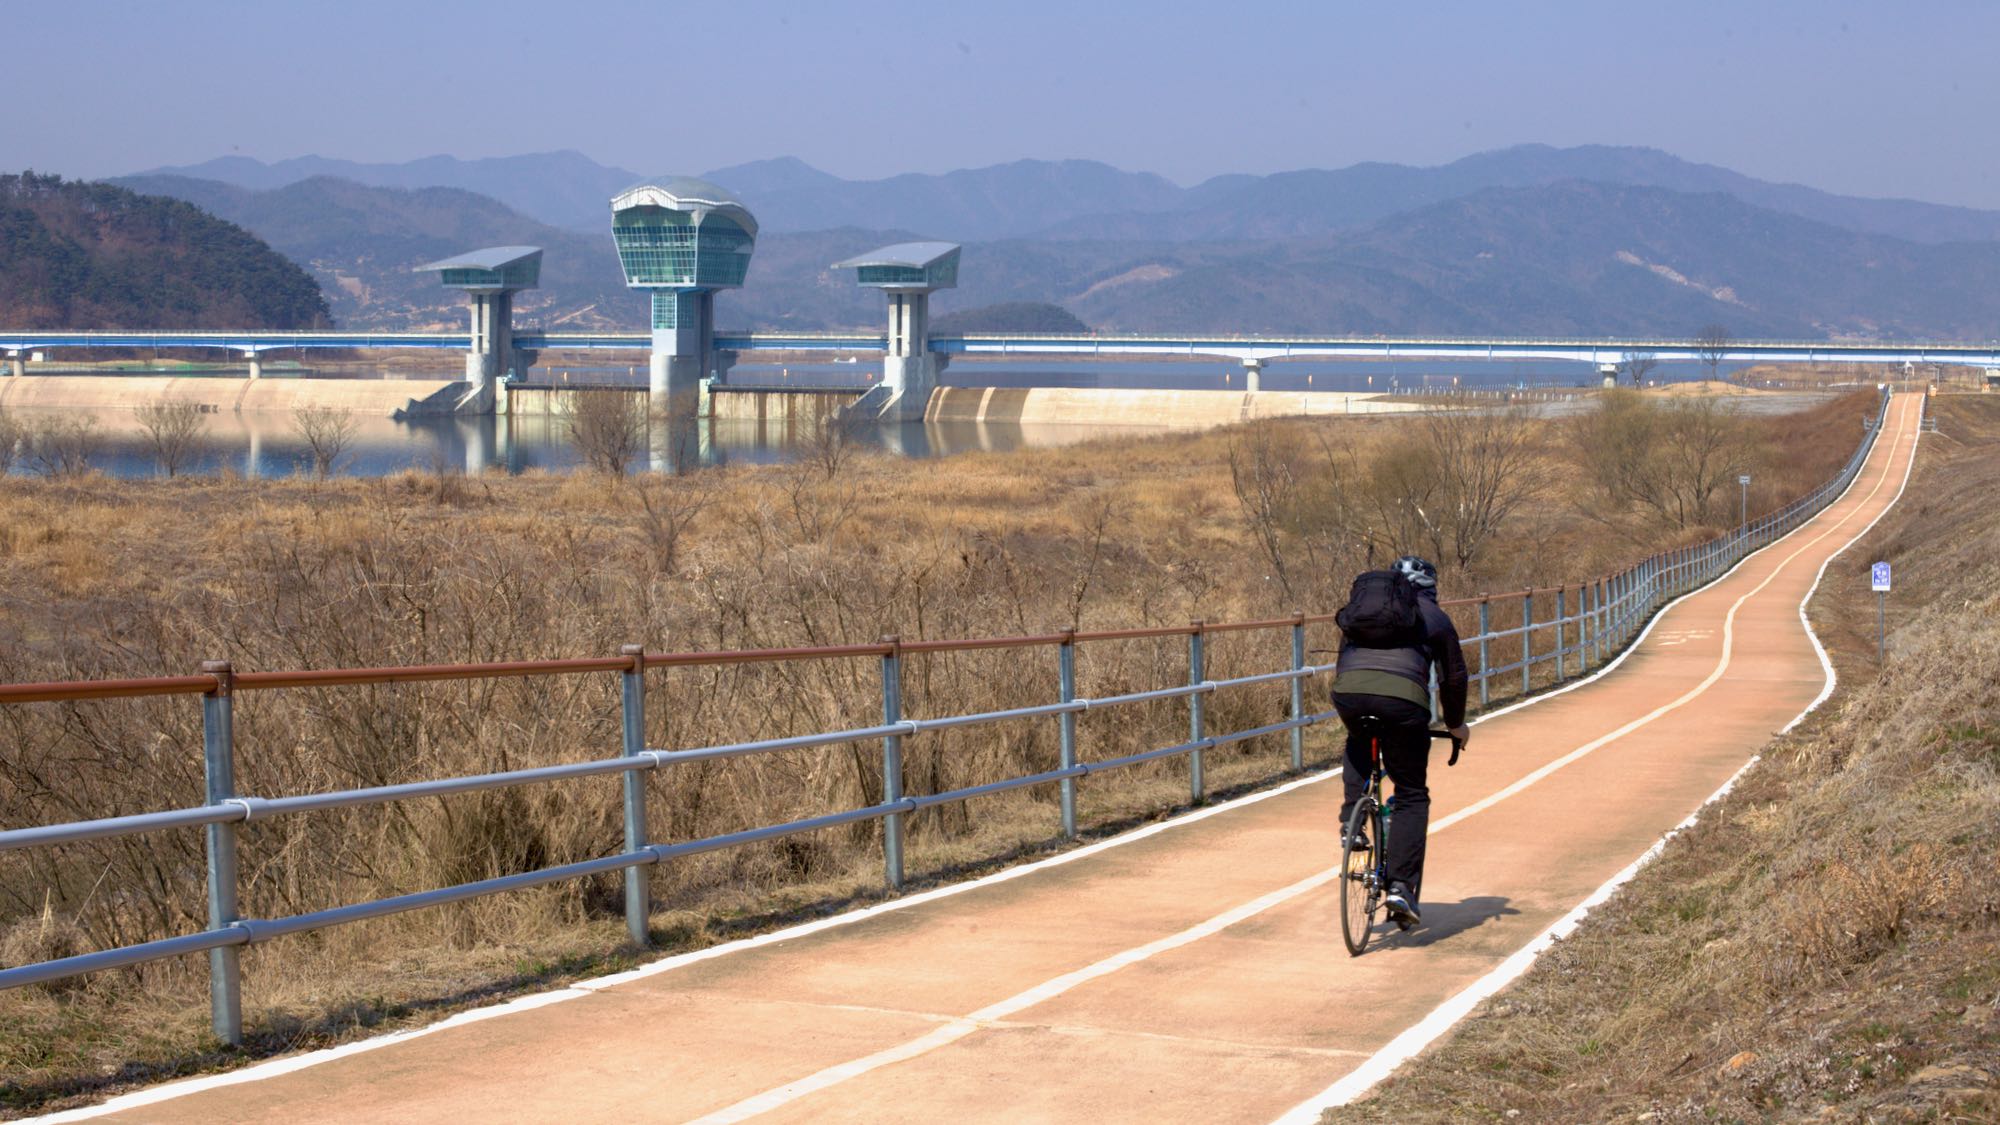 A picture of a rider and Gumi Weir along the Nakdonggang Bike Path (낙동강자전거길) in Gumi City on the Nakdong River (낙동강) in South Korea.